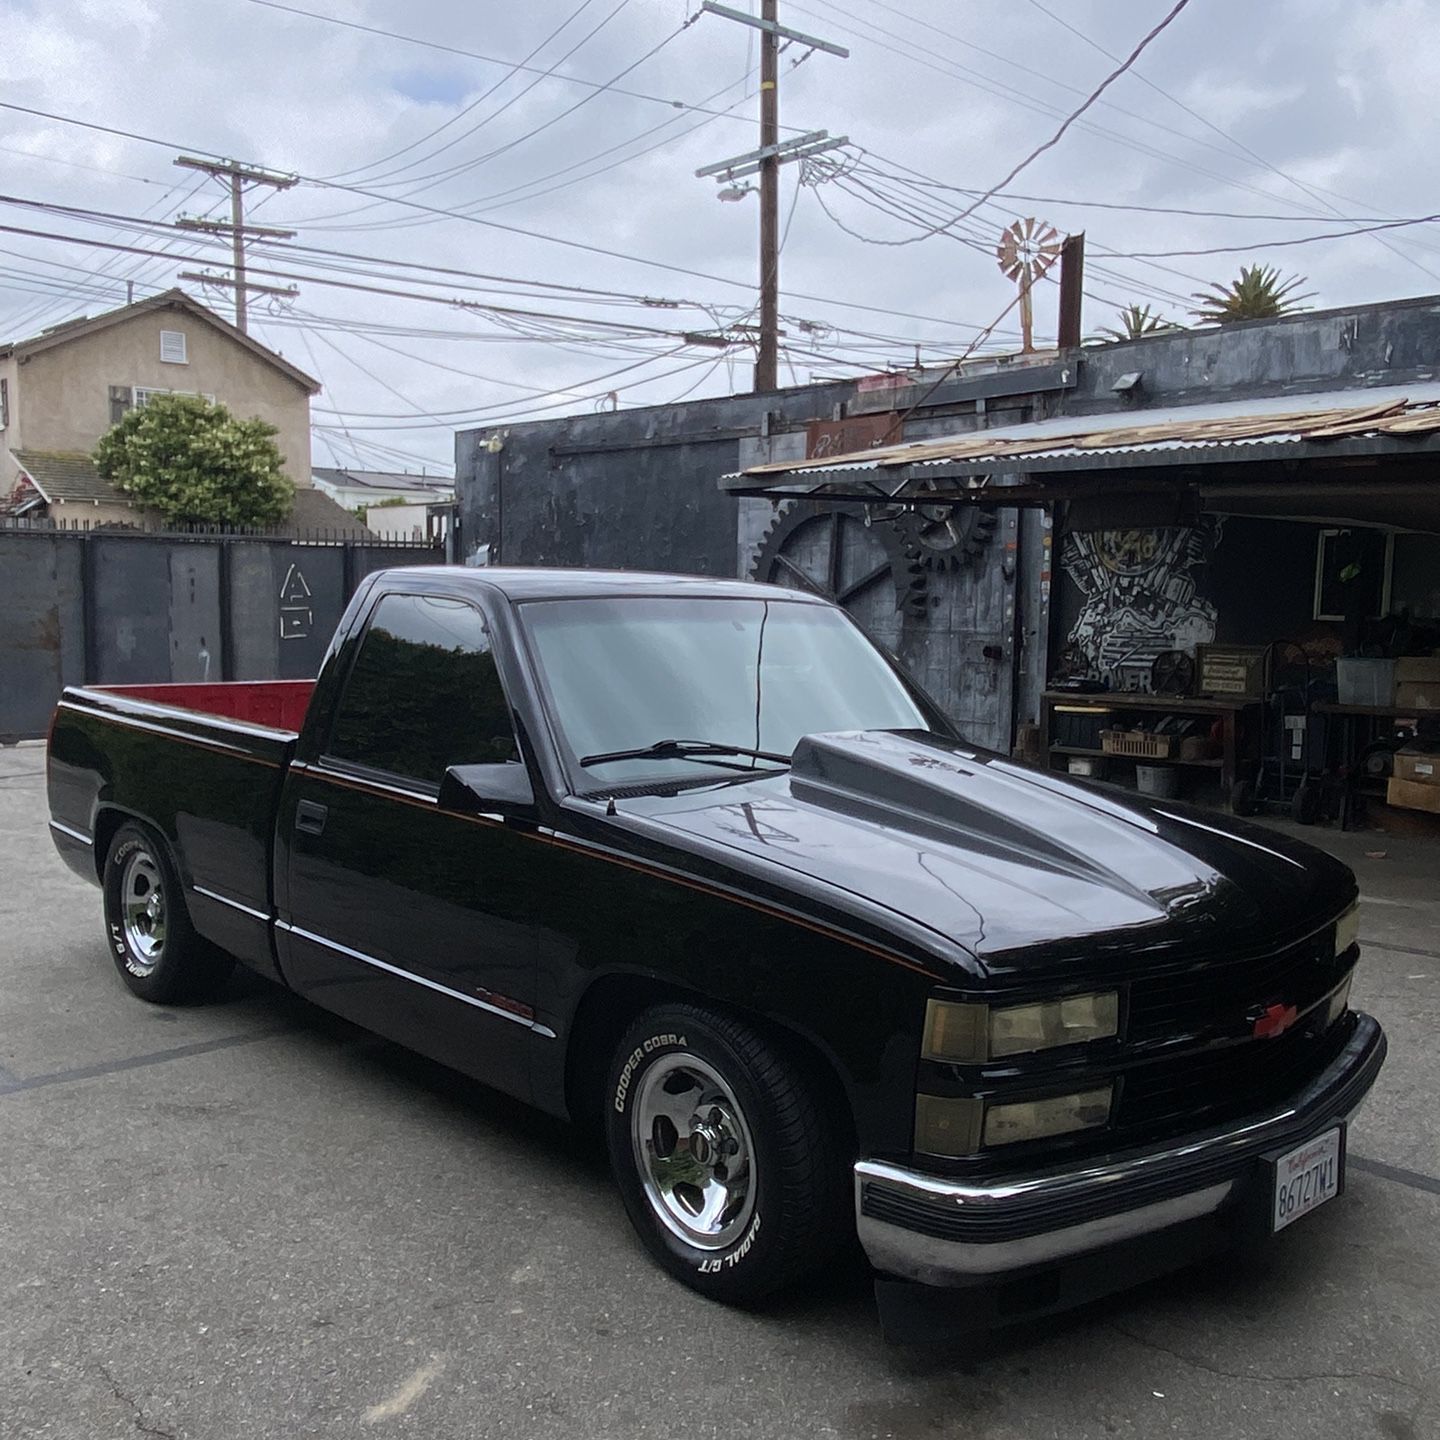 1998 Chevy Shortbed C1500